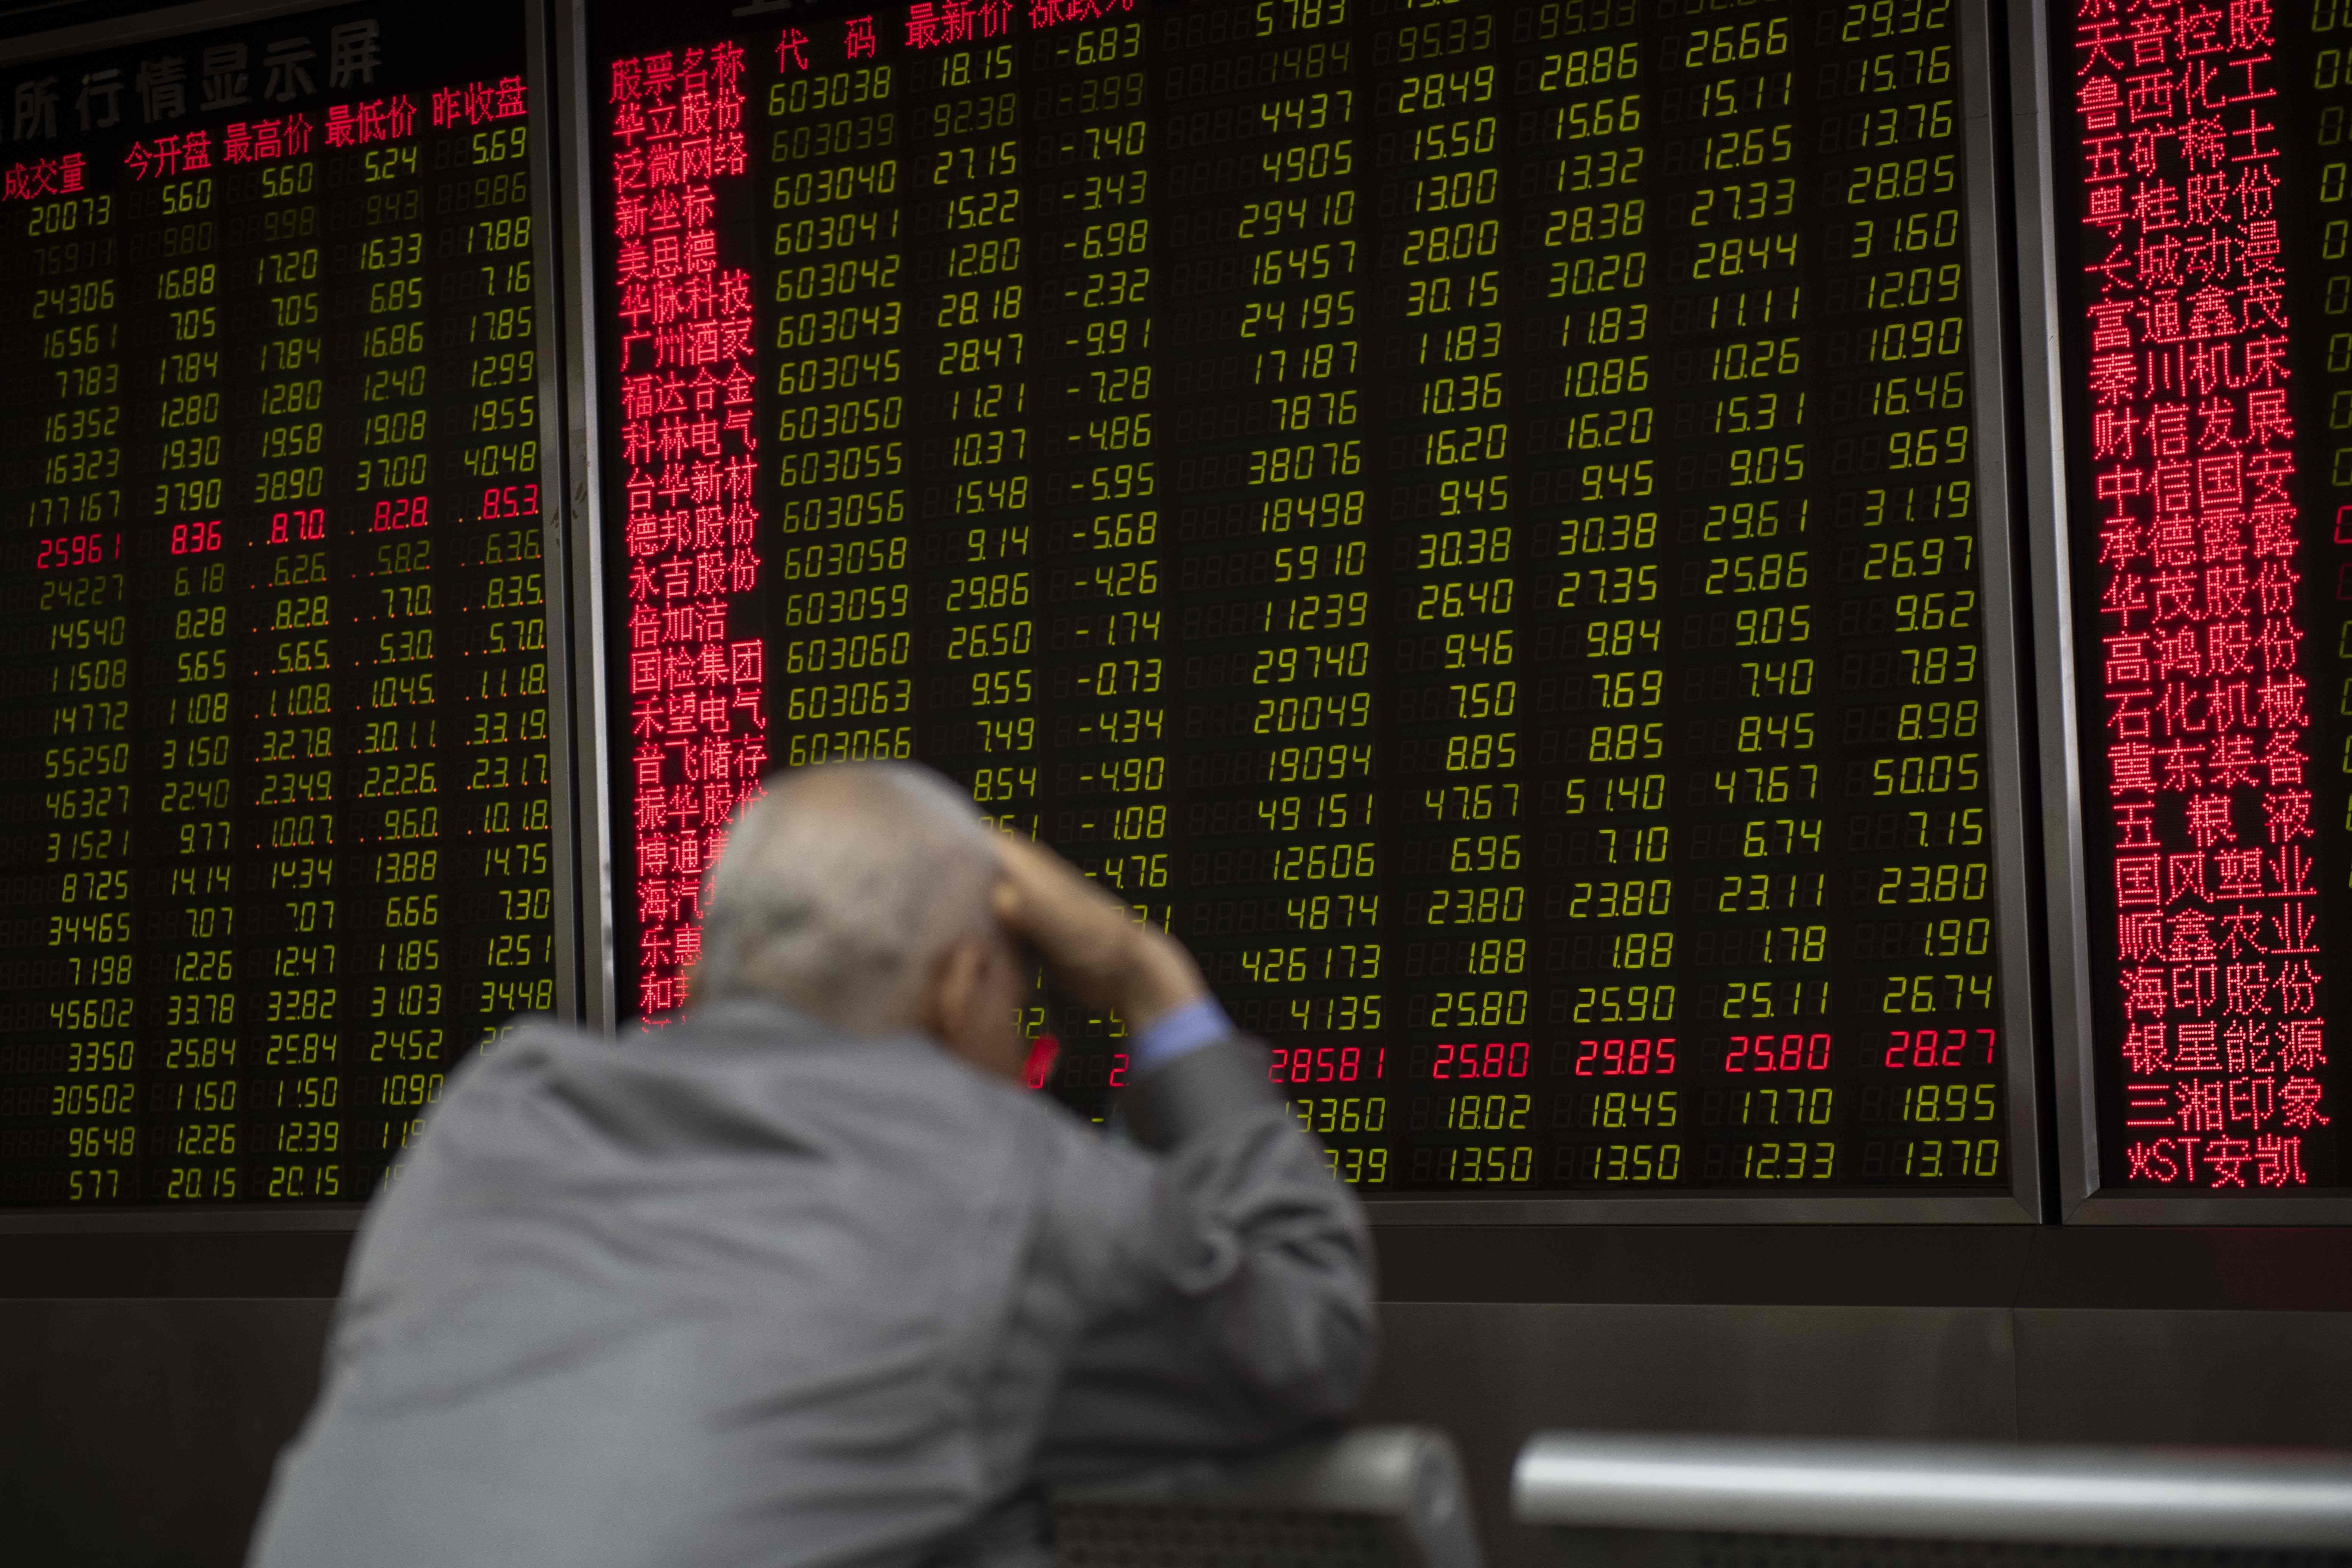 An investor looks at stock price movements on a screen at a securities company in Beijing. Photo: AFP